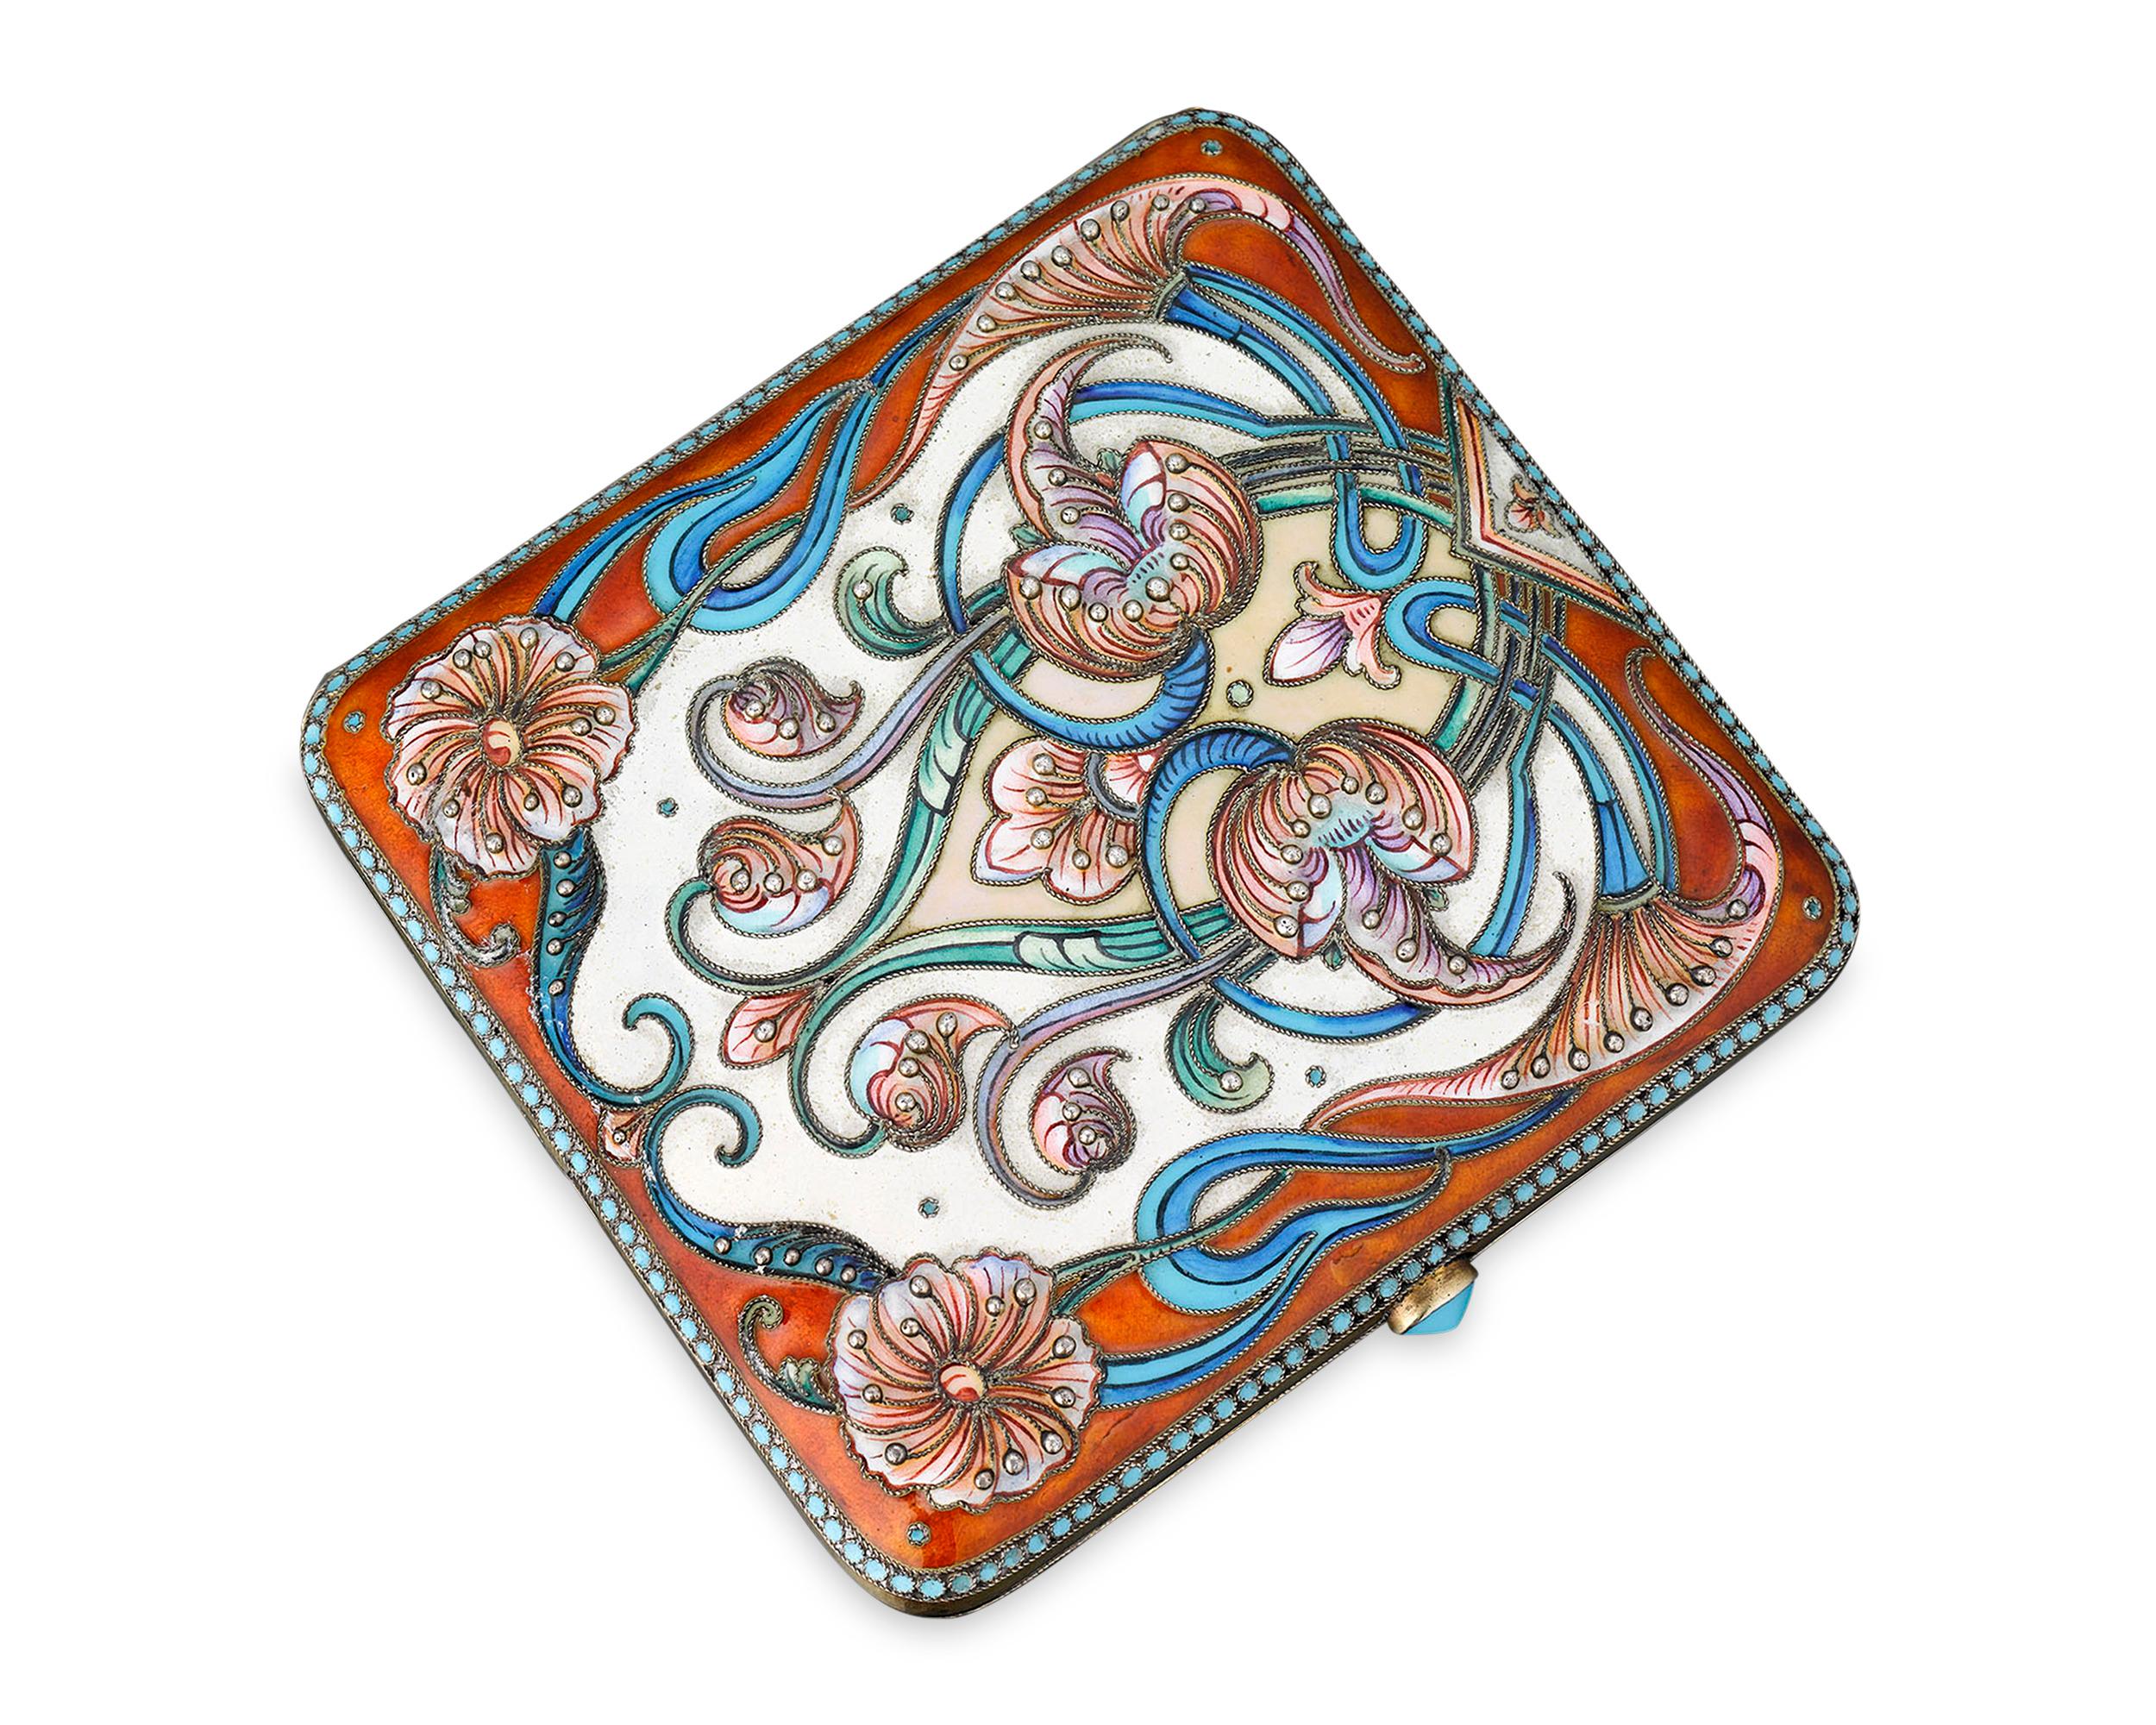 This elegant Russian enamel cigarette case is crafted of gilt silver and decorated with a bright floral design of cloisonné enamel. A turquoise-blue enamel thumb piece completes the sumptuous design. The case bears the 84 zolotniks mark of St.